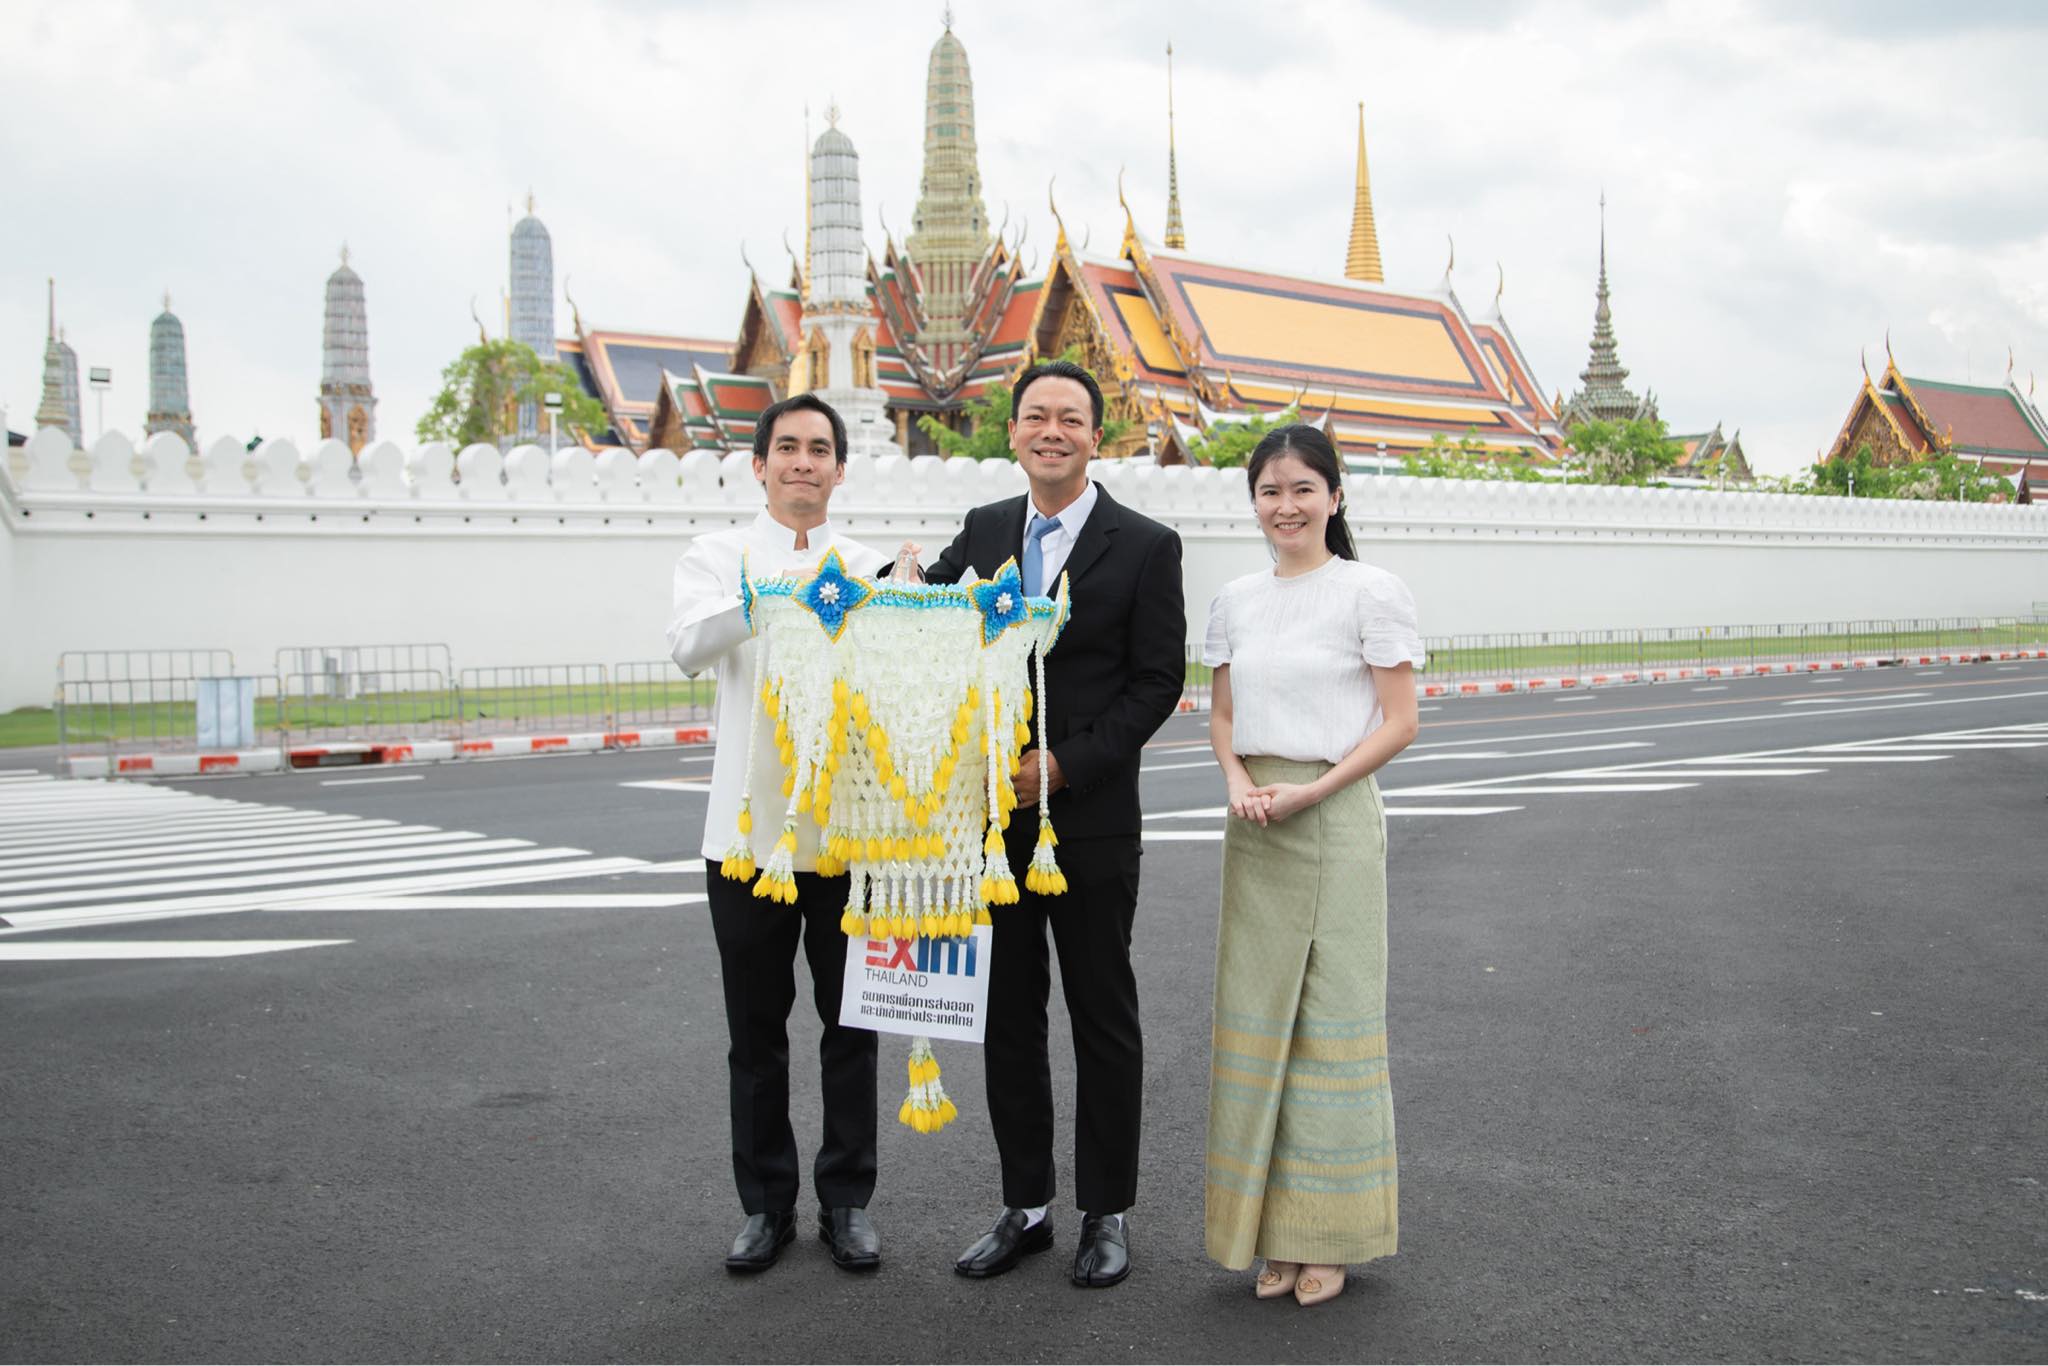 EXIM Thailand Presents Lantern with Emblem as Buddhist Offering for Royal Merit-Making Ceremony in Observance of Visakha Bucha Day